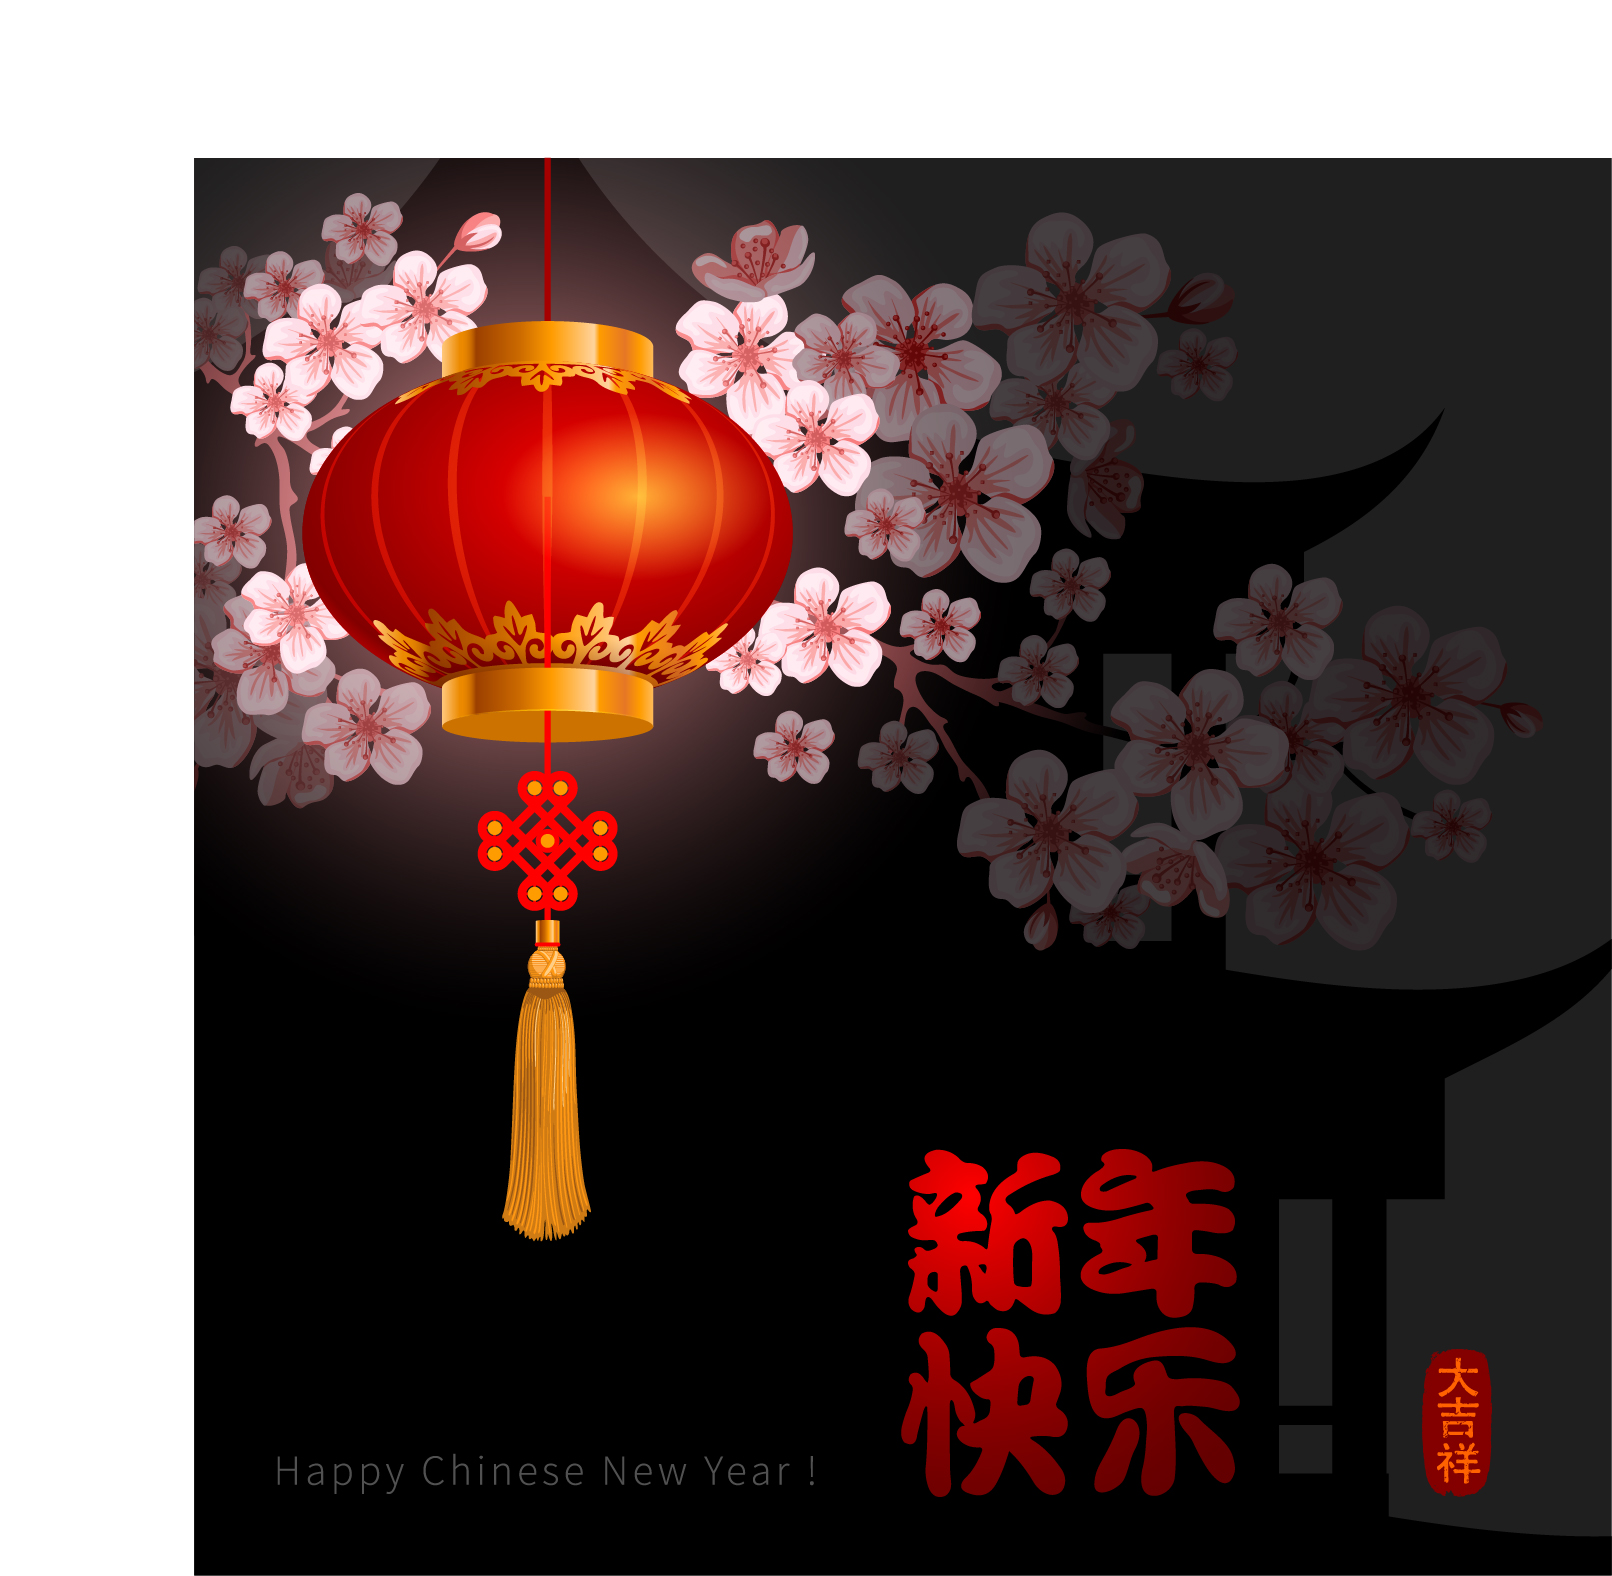 Chinese new year background with red lantern vector 02 year new lantern chinese background   